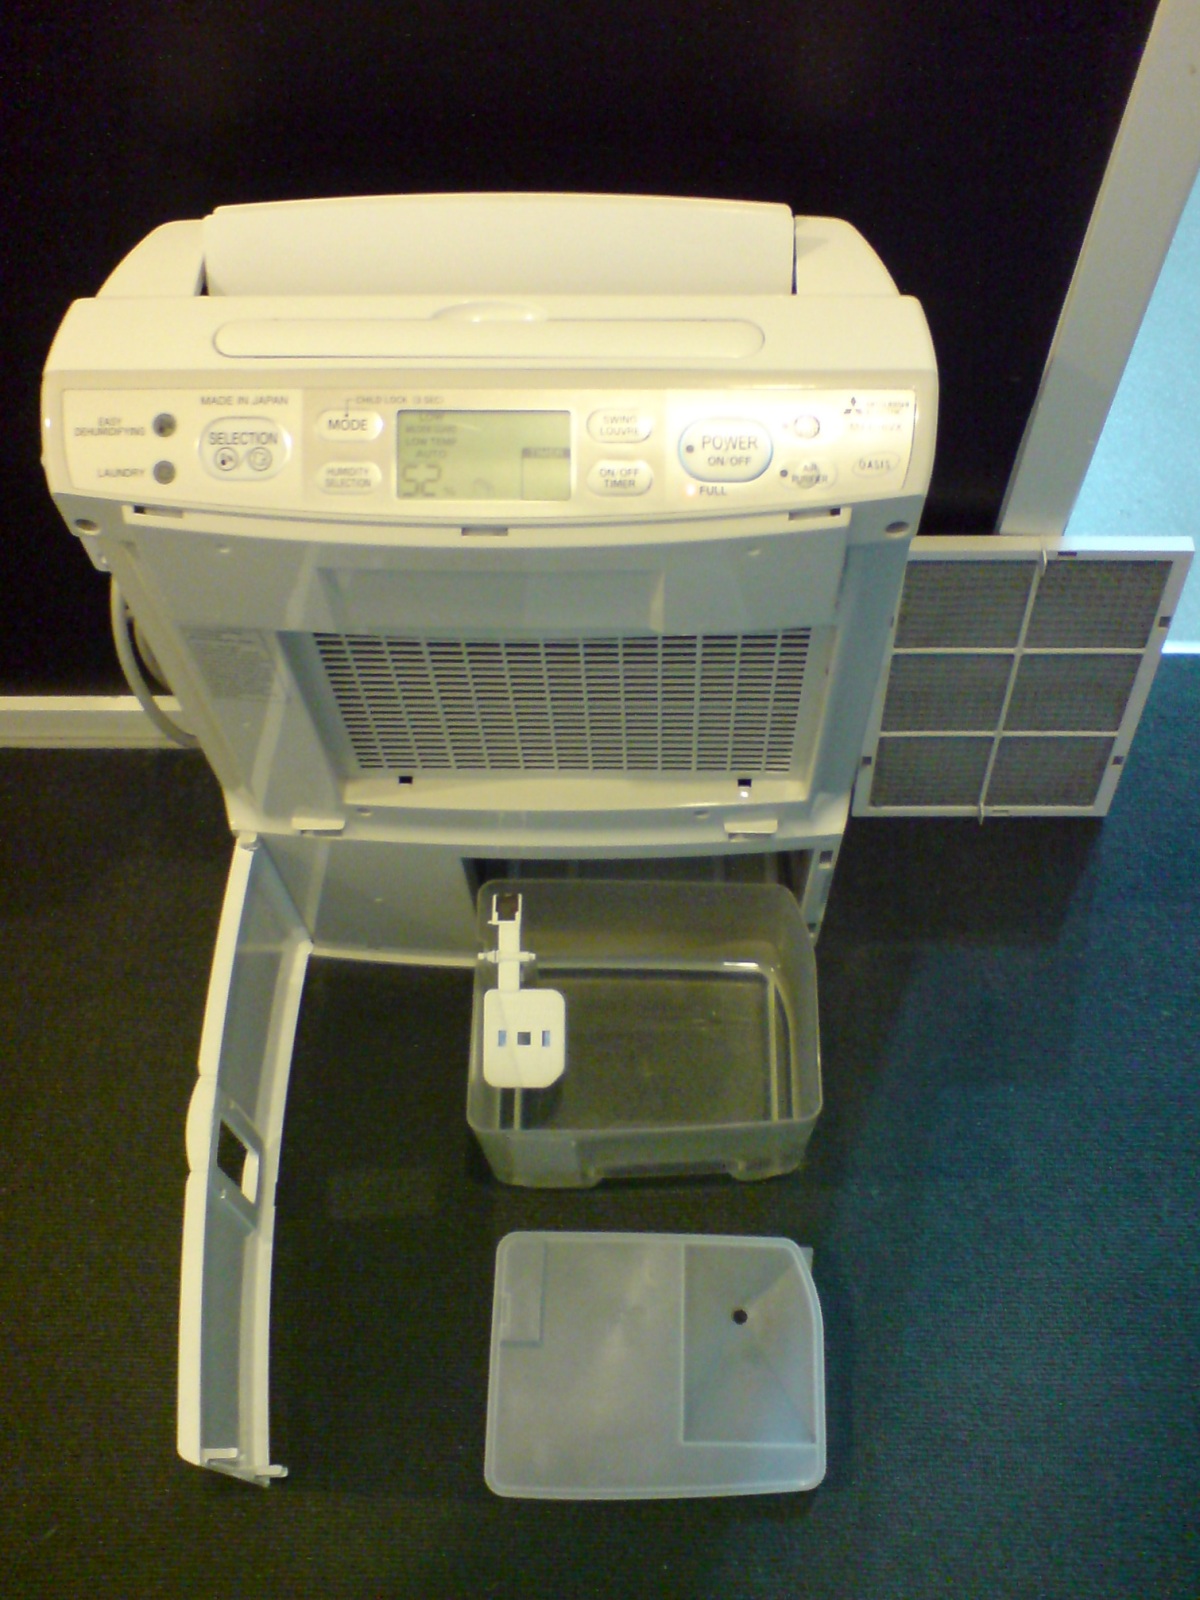 Tips for Maintaining your Dehumidifier